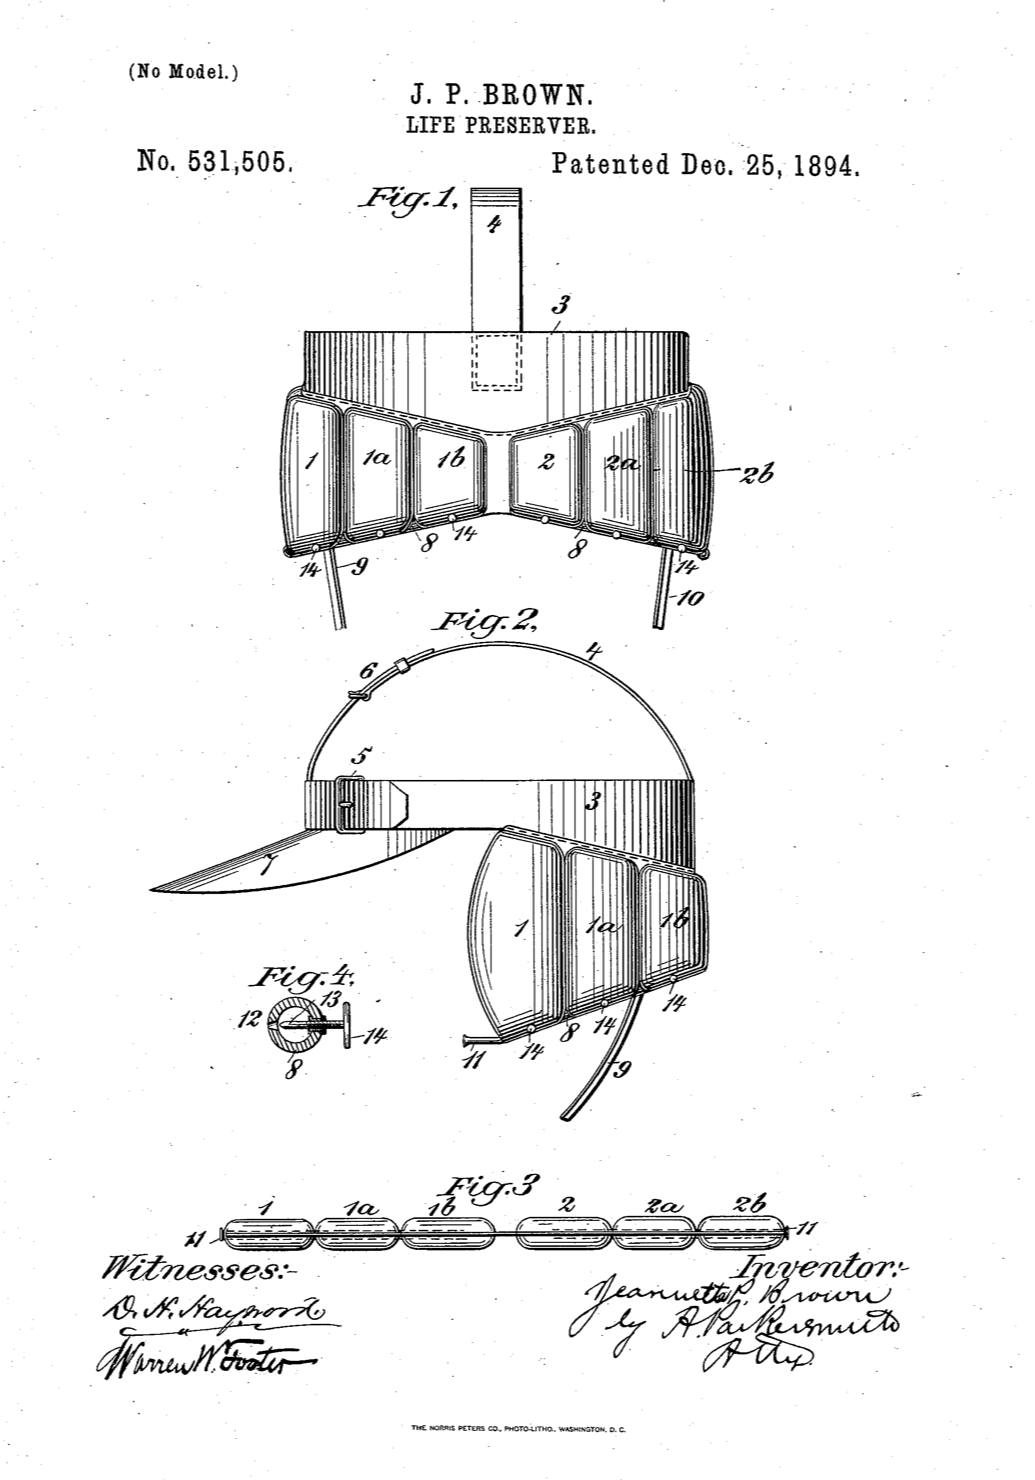 Drawing specifications of Jeanette P. Brown’s 1893 patented design for a life preserver.